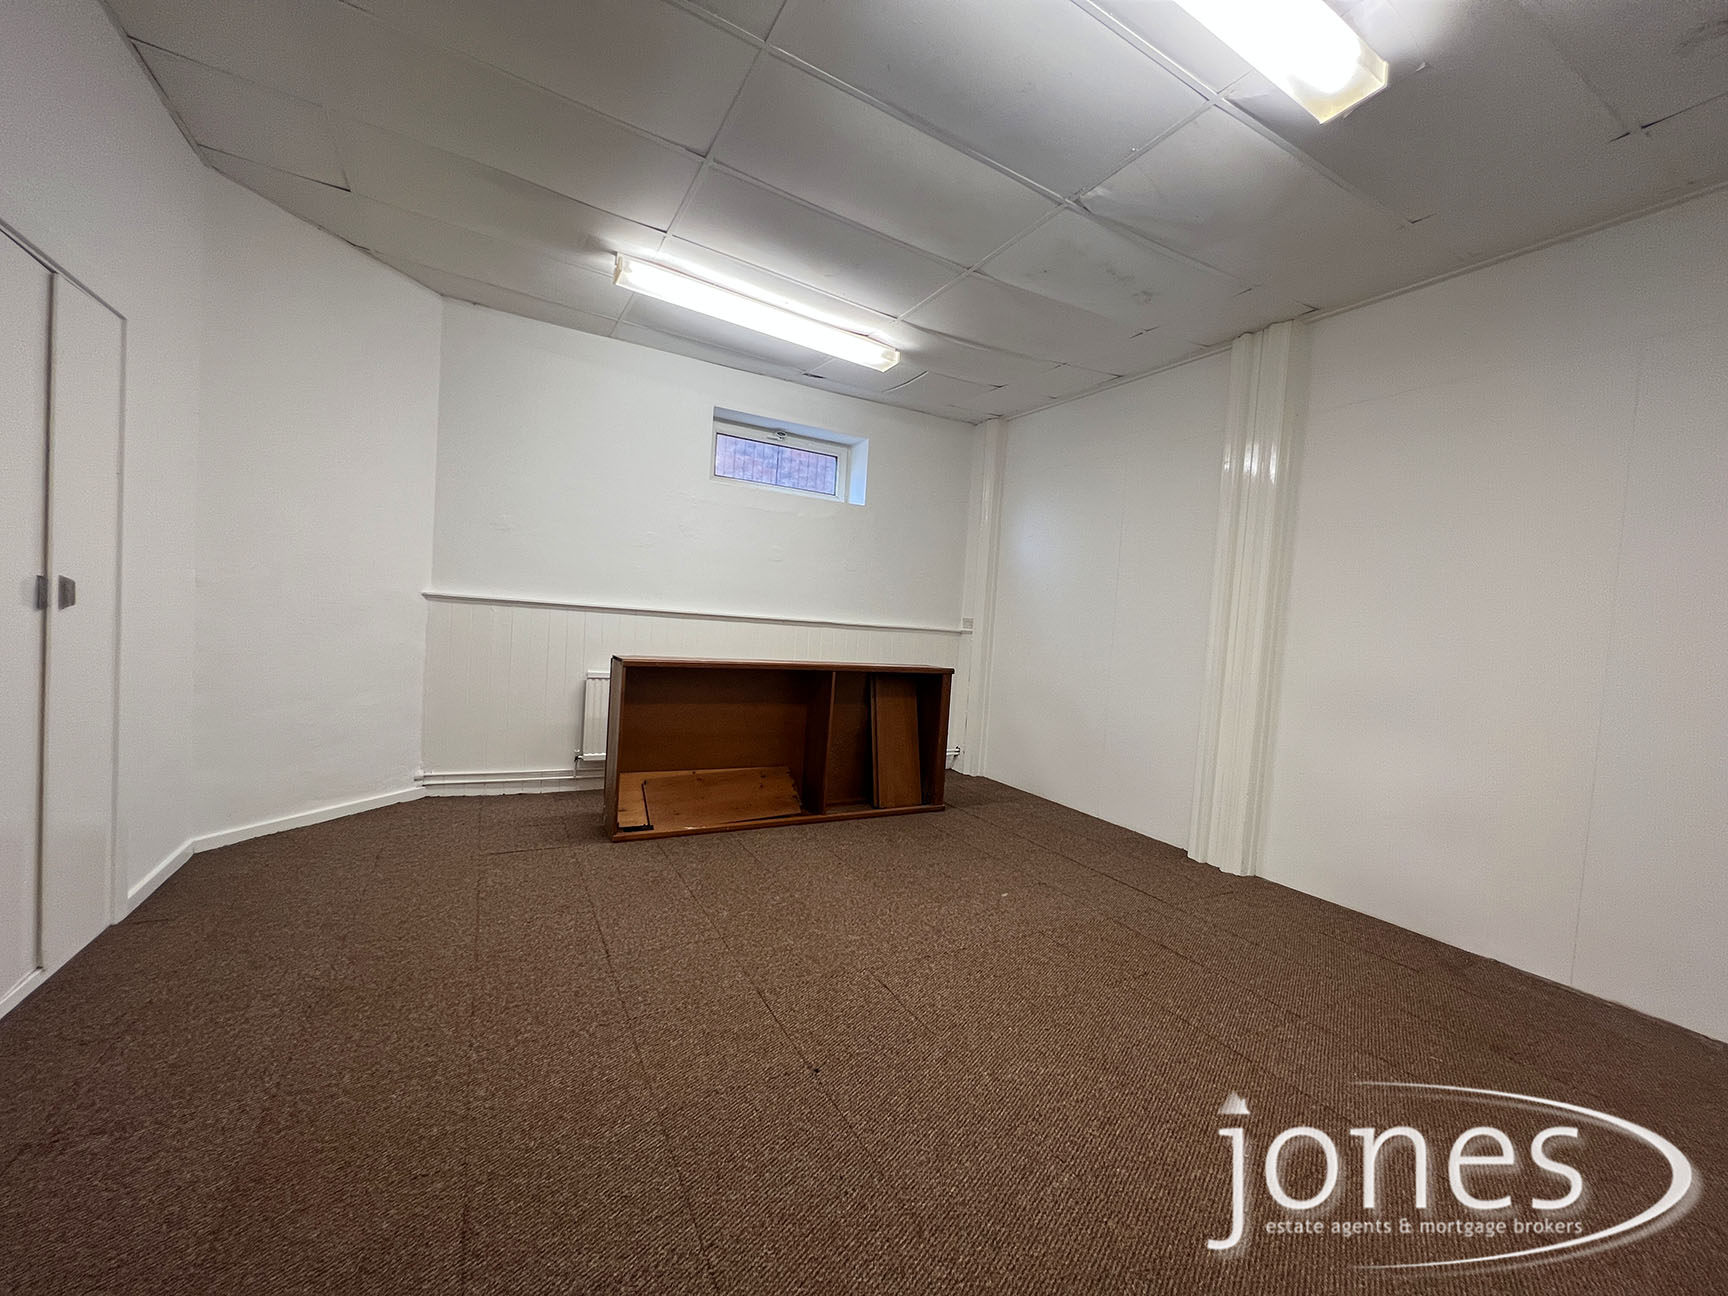 Home for Sale Let - Photo 05 Parliament Street, Stockton,TS18 3DH